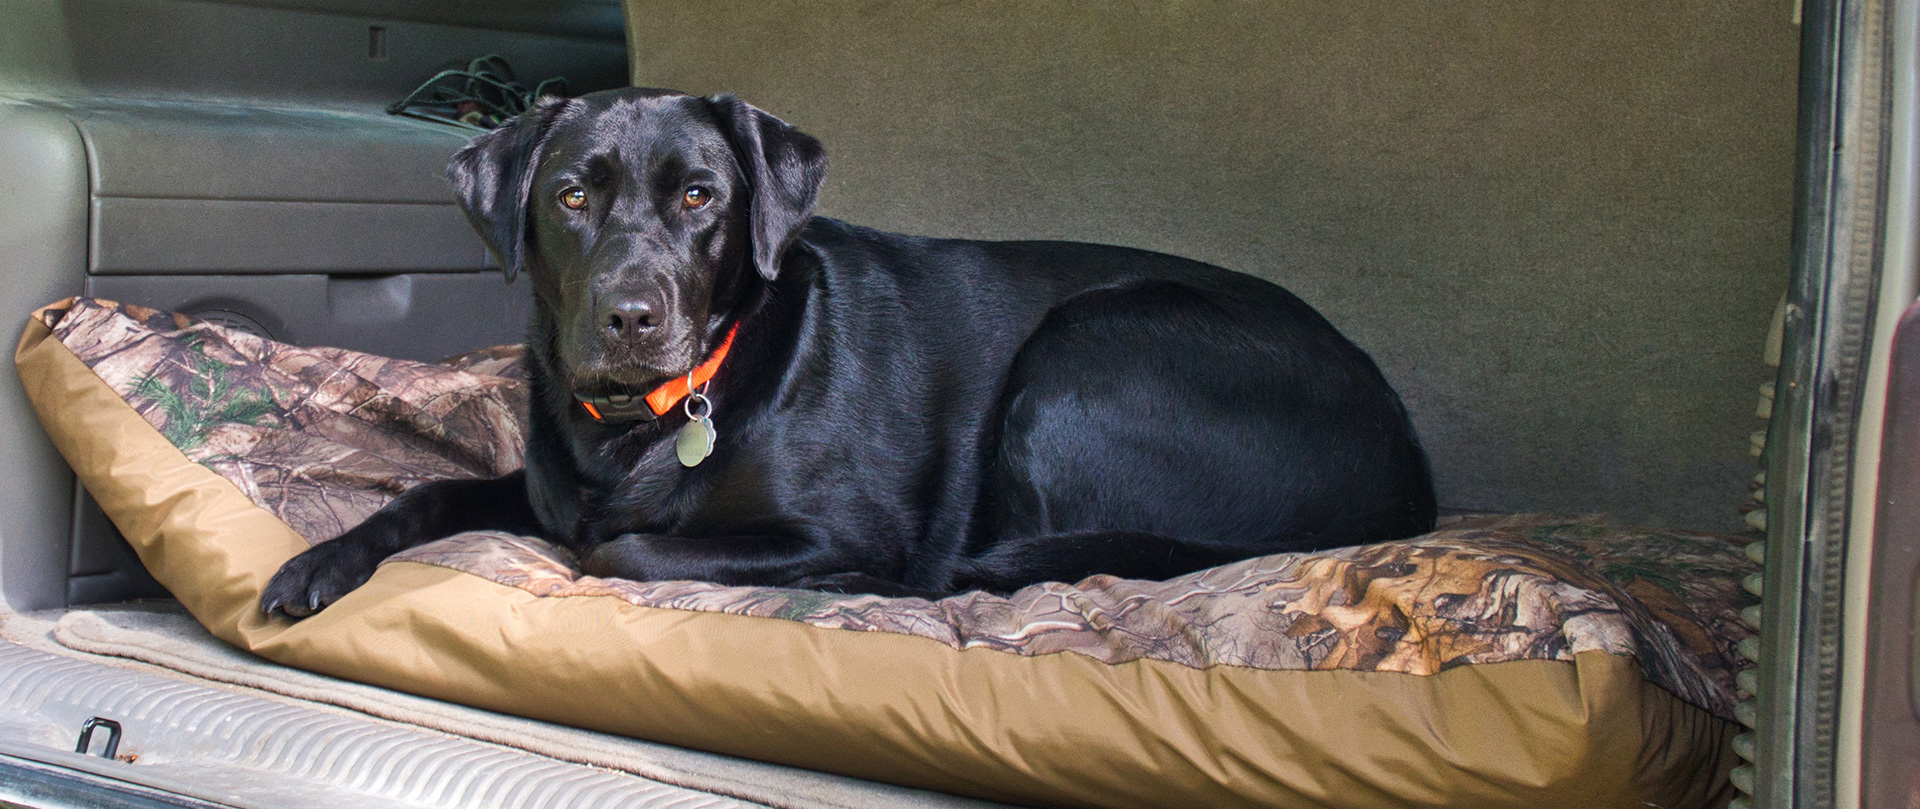 Thermabed - Best Pet Bed